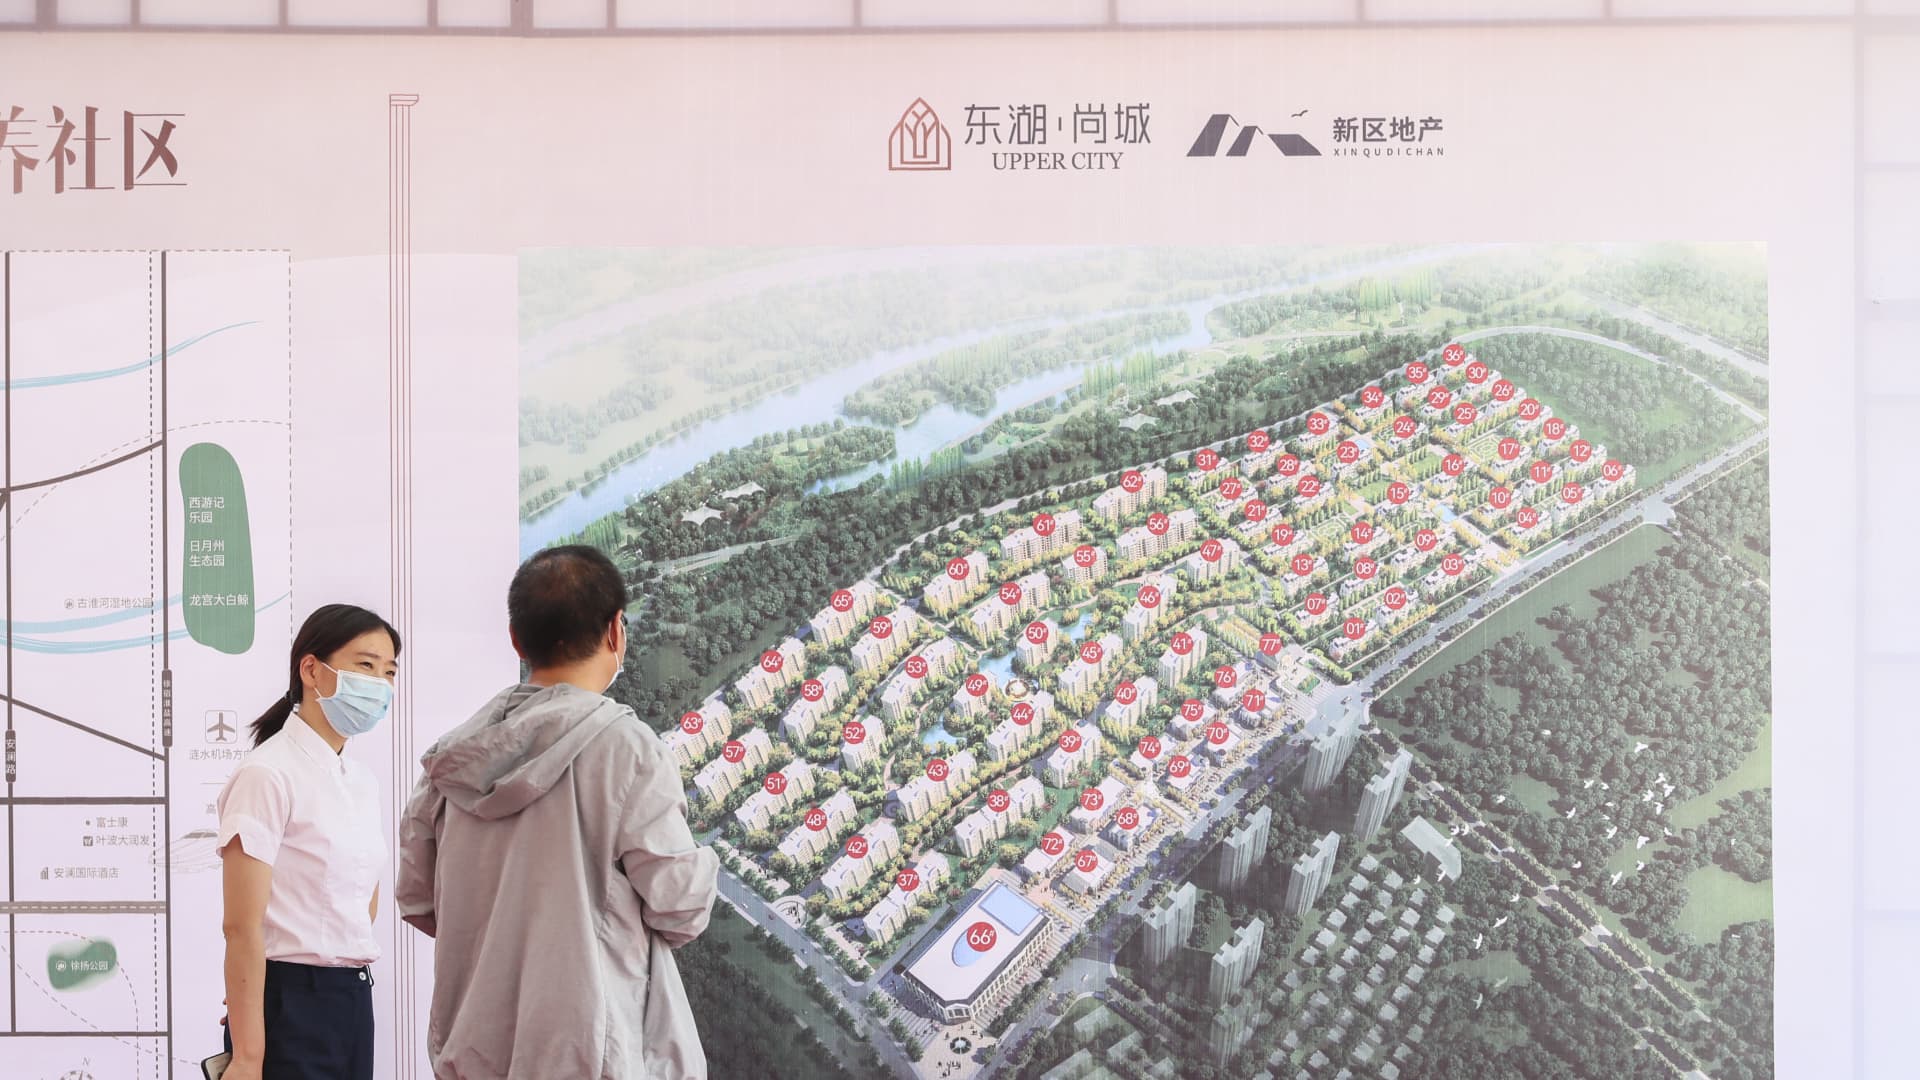 China’s property sales are set for a worse fall than in 2008, says S&P